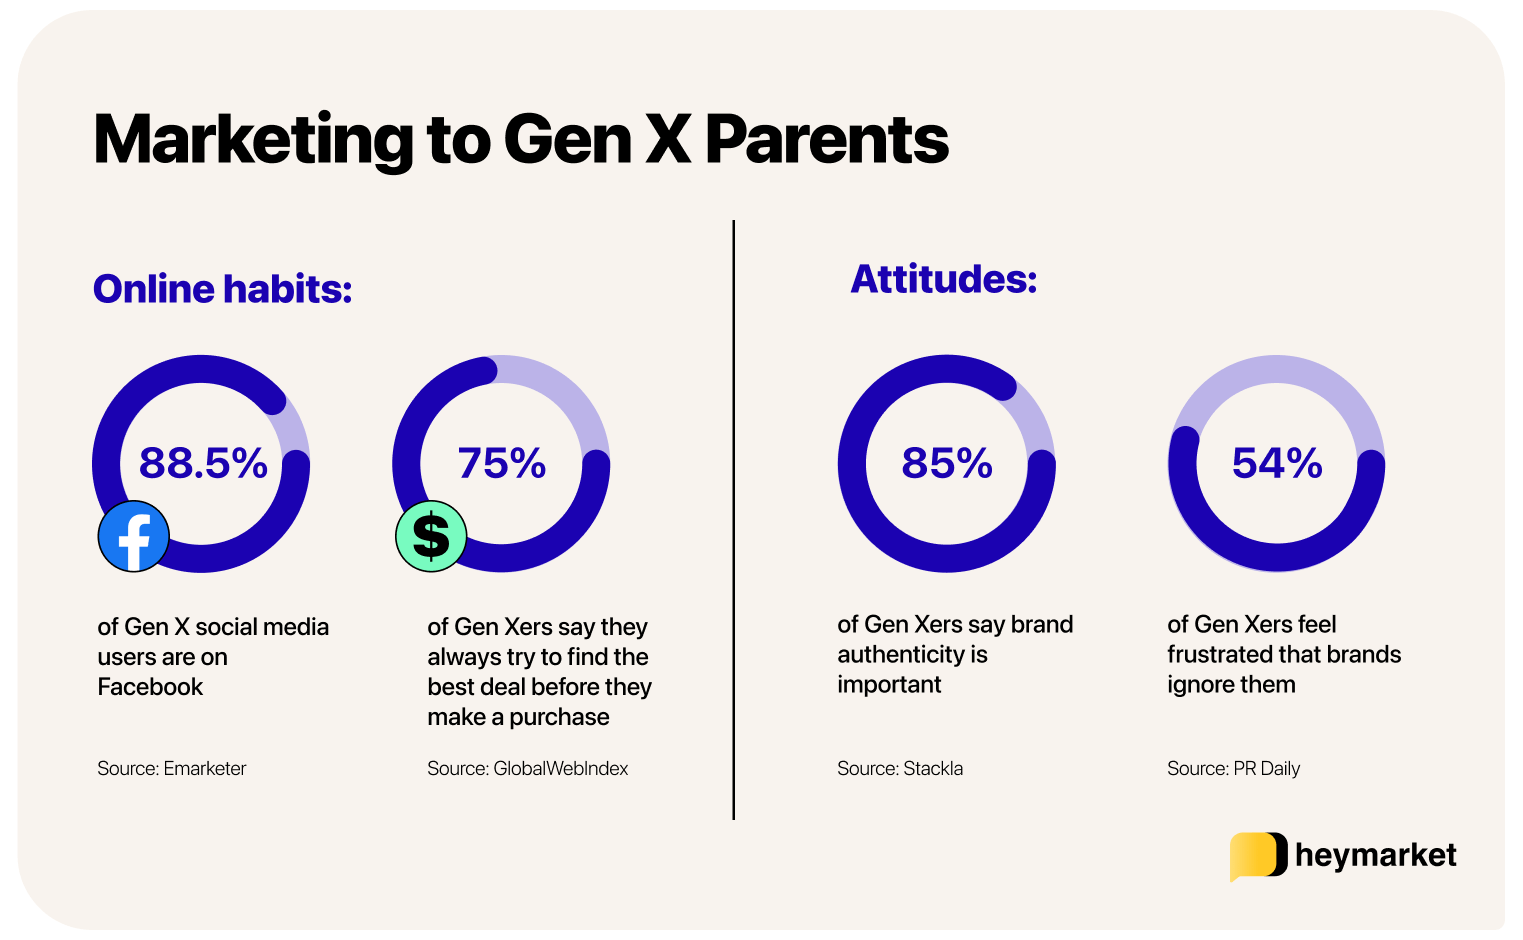 Graphic about how to market to Gen X parents